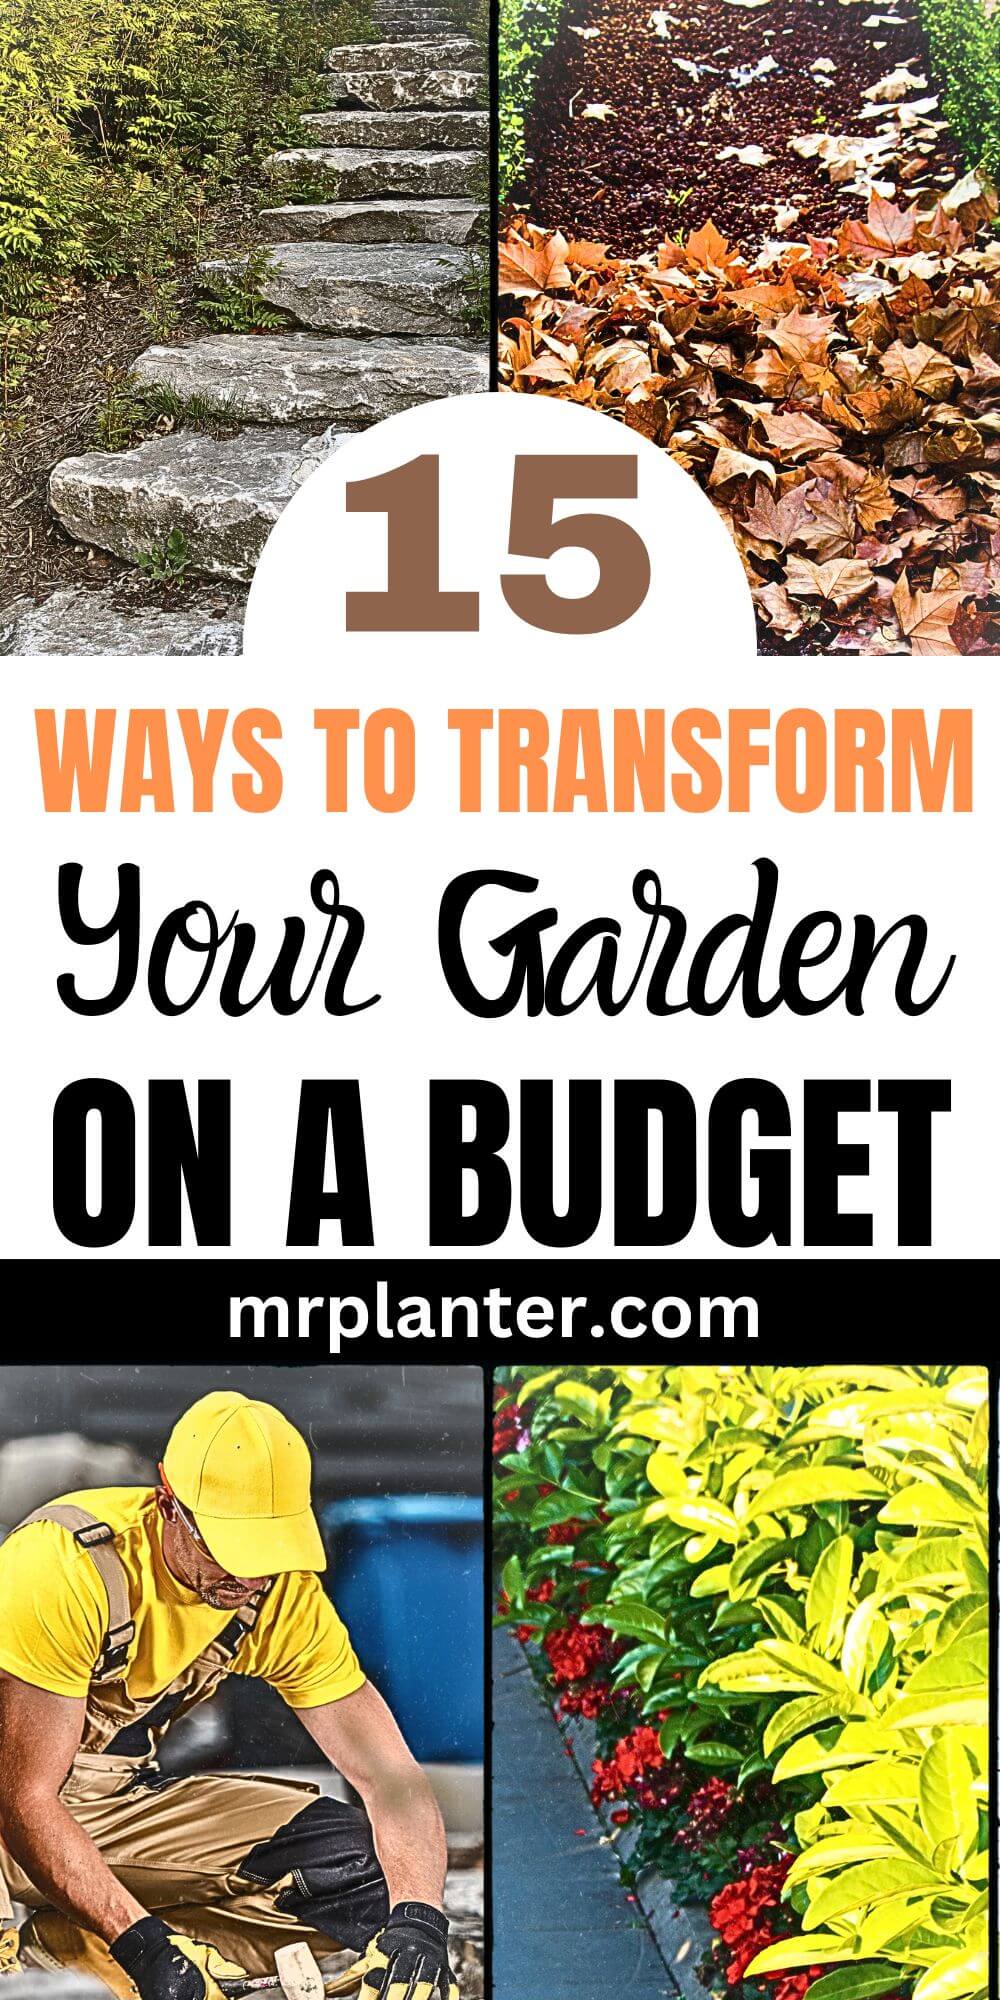 Ways to Transform Your Garden on a Budget